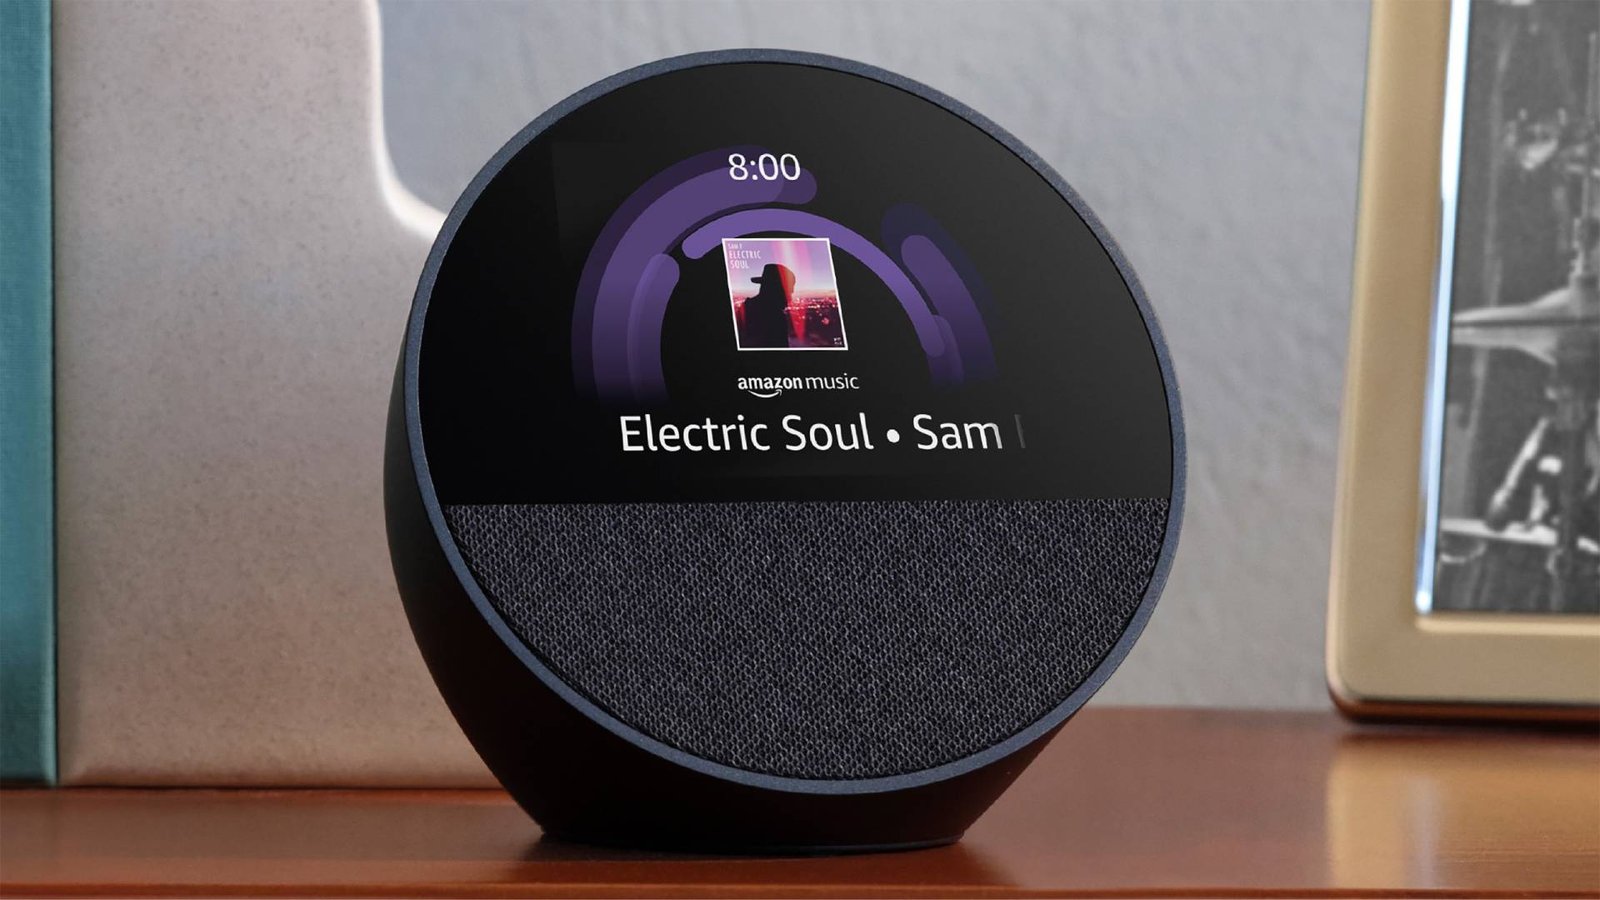 Amazon’s Echo Spot gets a long-awaited refresh with a new design and better audio